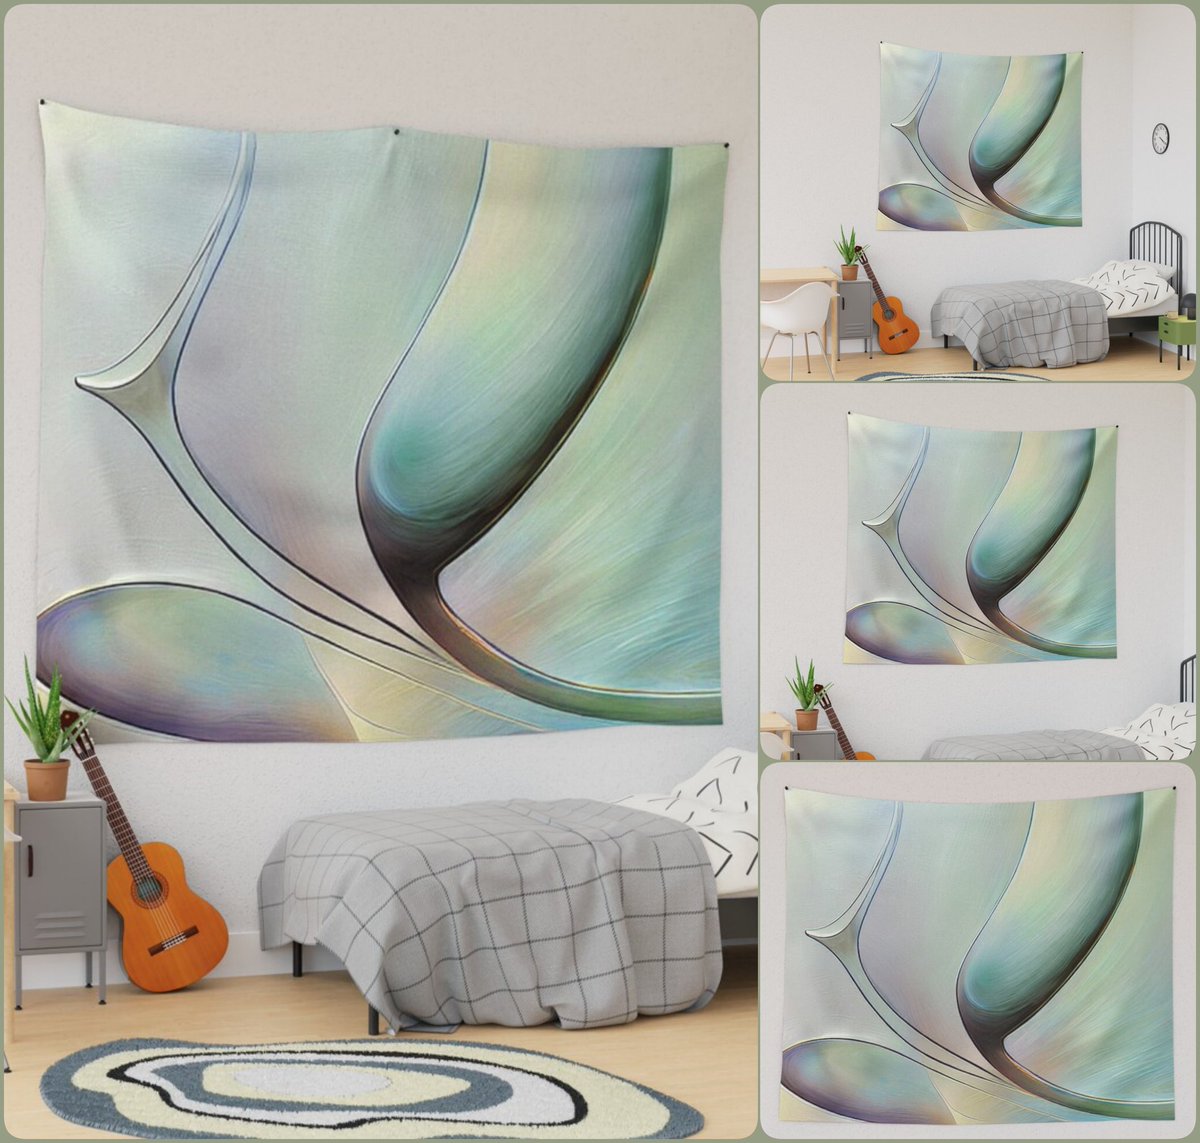 Quantum Atmosphere Tapestry~by Art Falaxy~
~The Art of Uniqueness!~
#accents #wall #art #artfalaxy #canvas #framed #metal #posters #prints #redbubble #tapestry #wood #trendy #modern #FindYourThing

redbubble.com/i/tapestry/Qua…
COLLECTION: redbubble.com/shop/ap/159885…